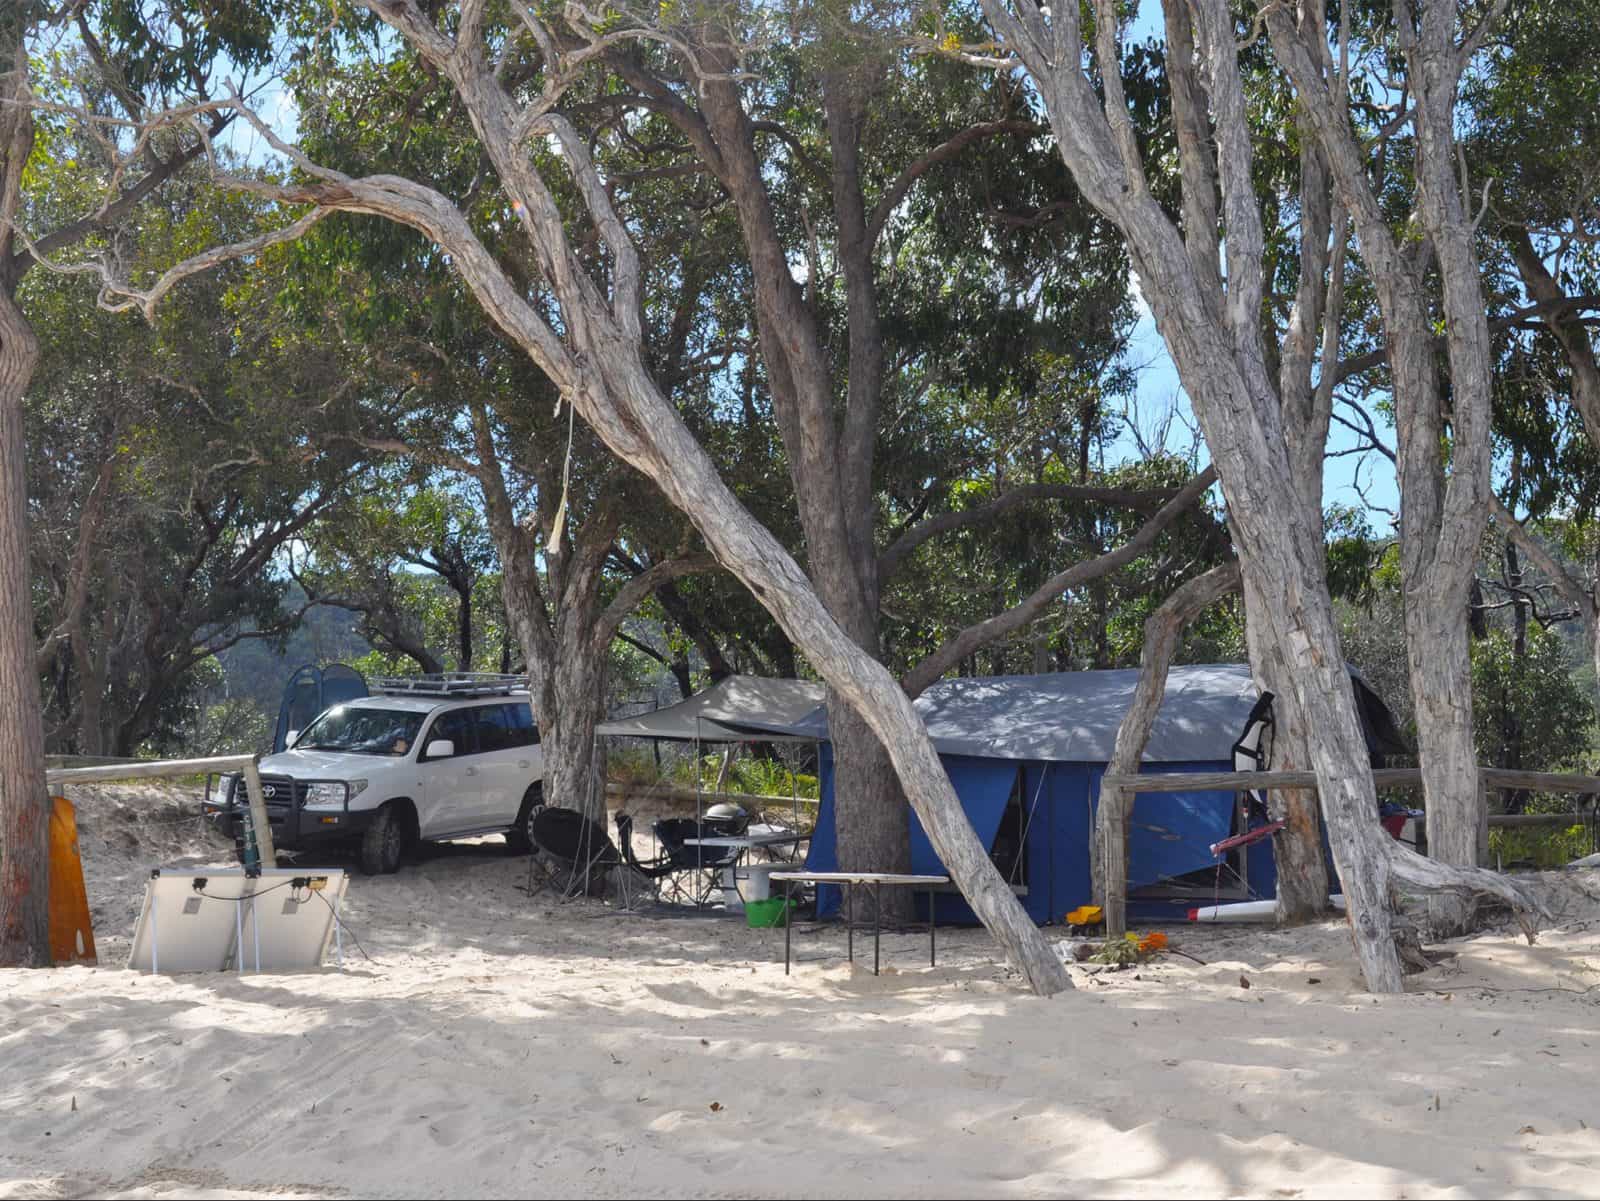 Tent and 4WD under trees on beach.